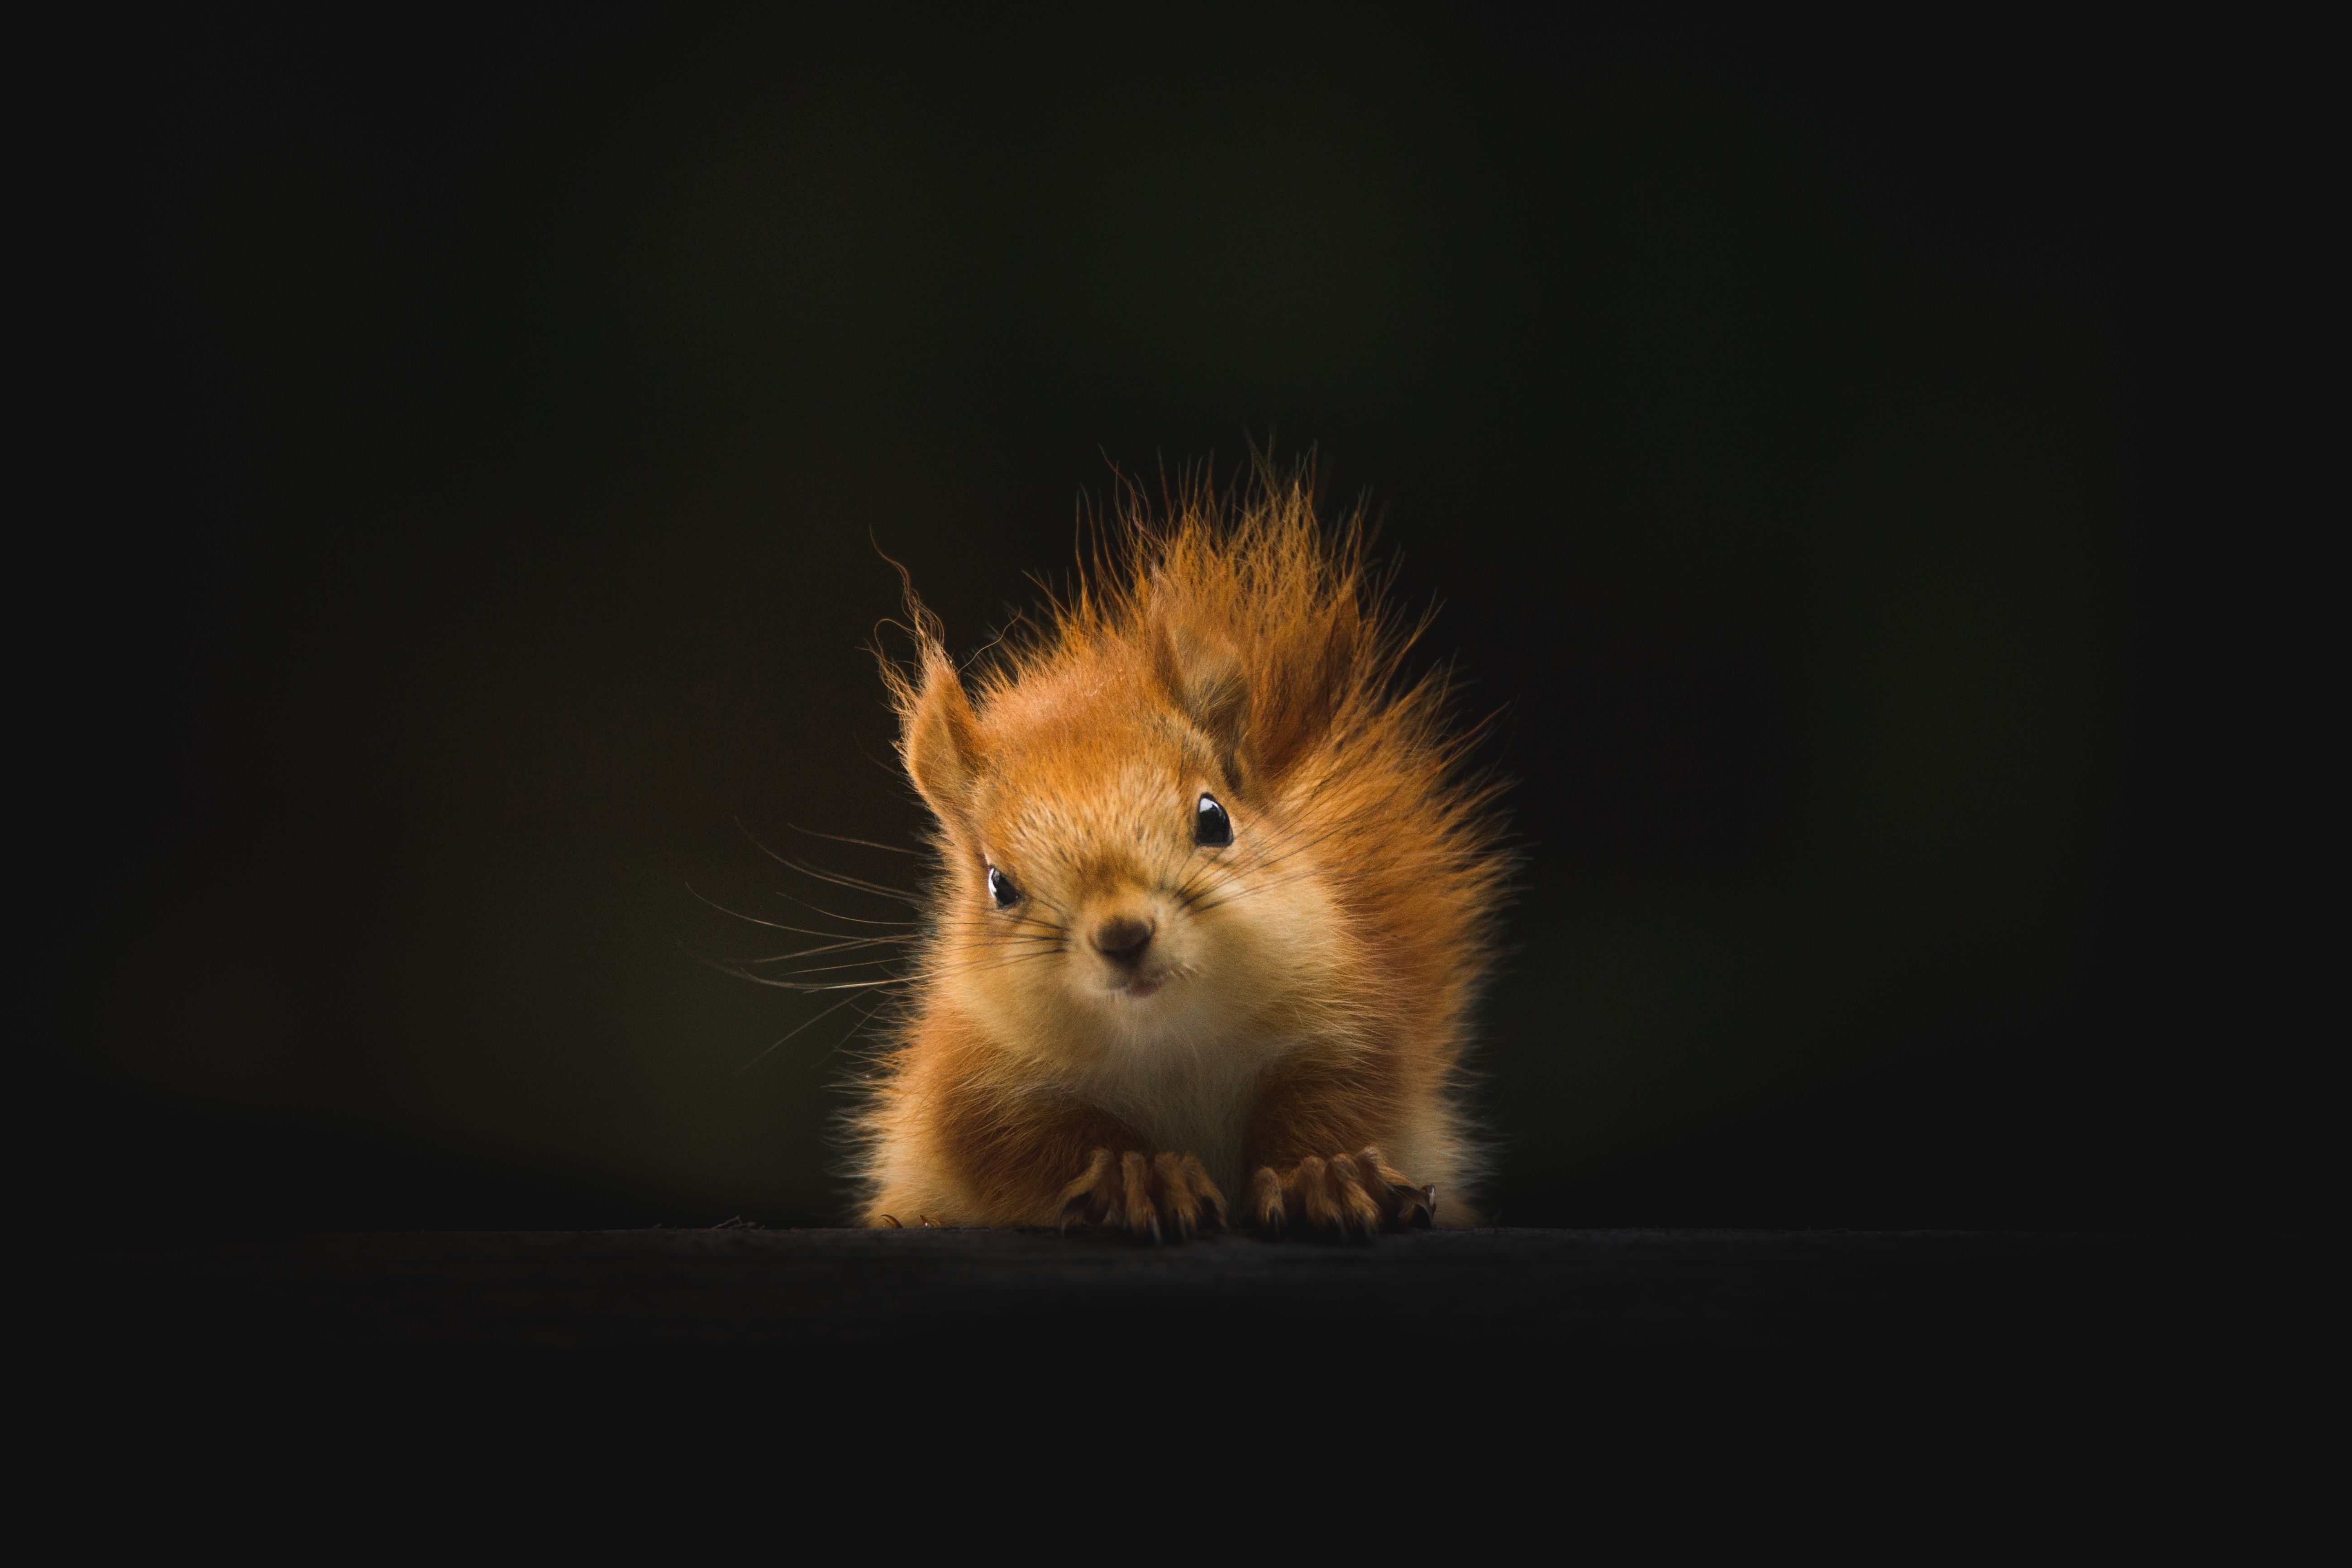 100389 download wallpaper animal, animals, squirrel, fluffy screensavers and pictures for free